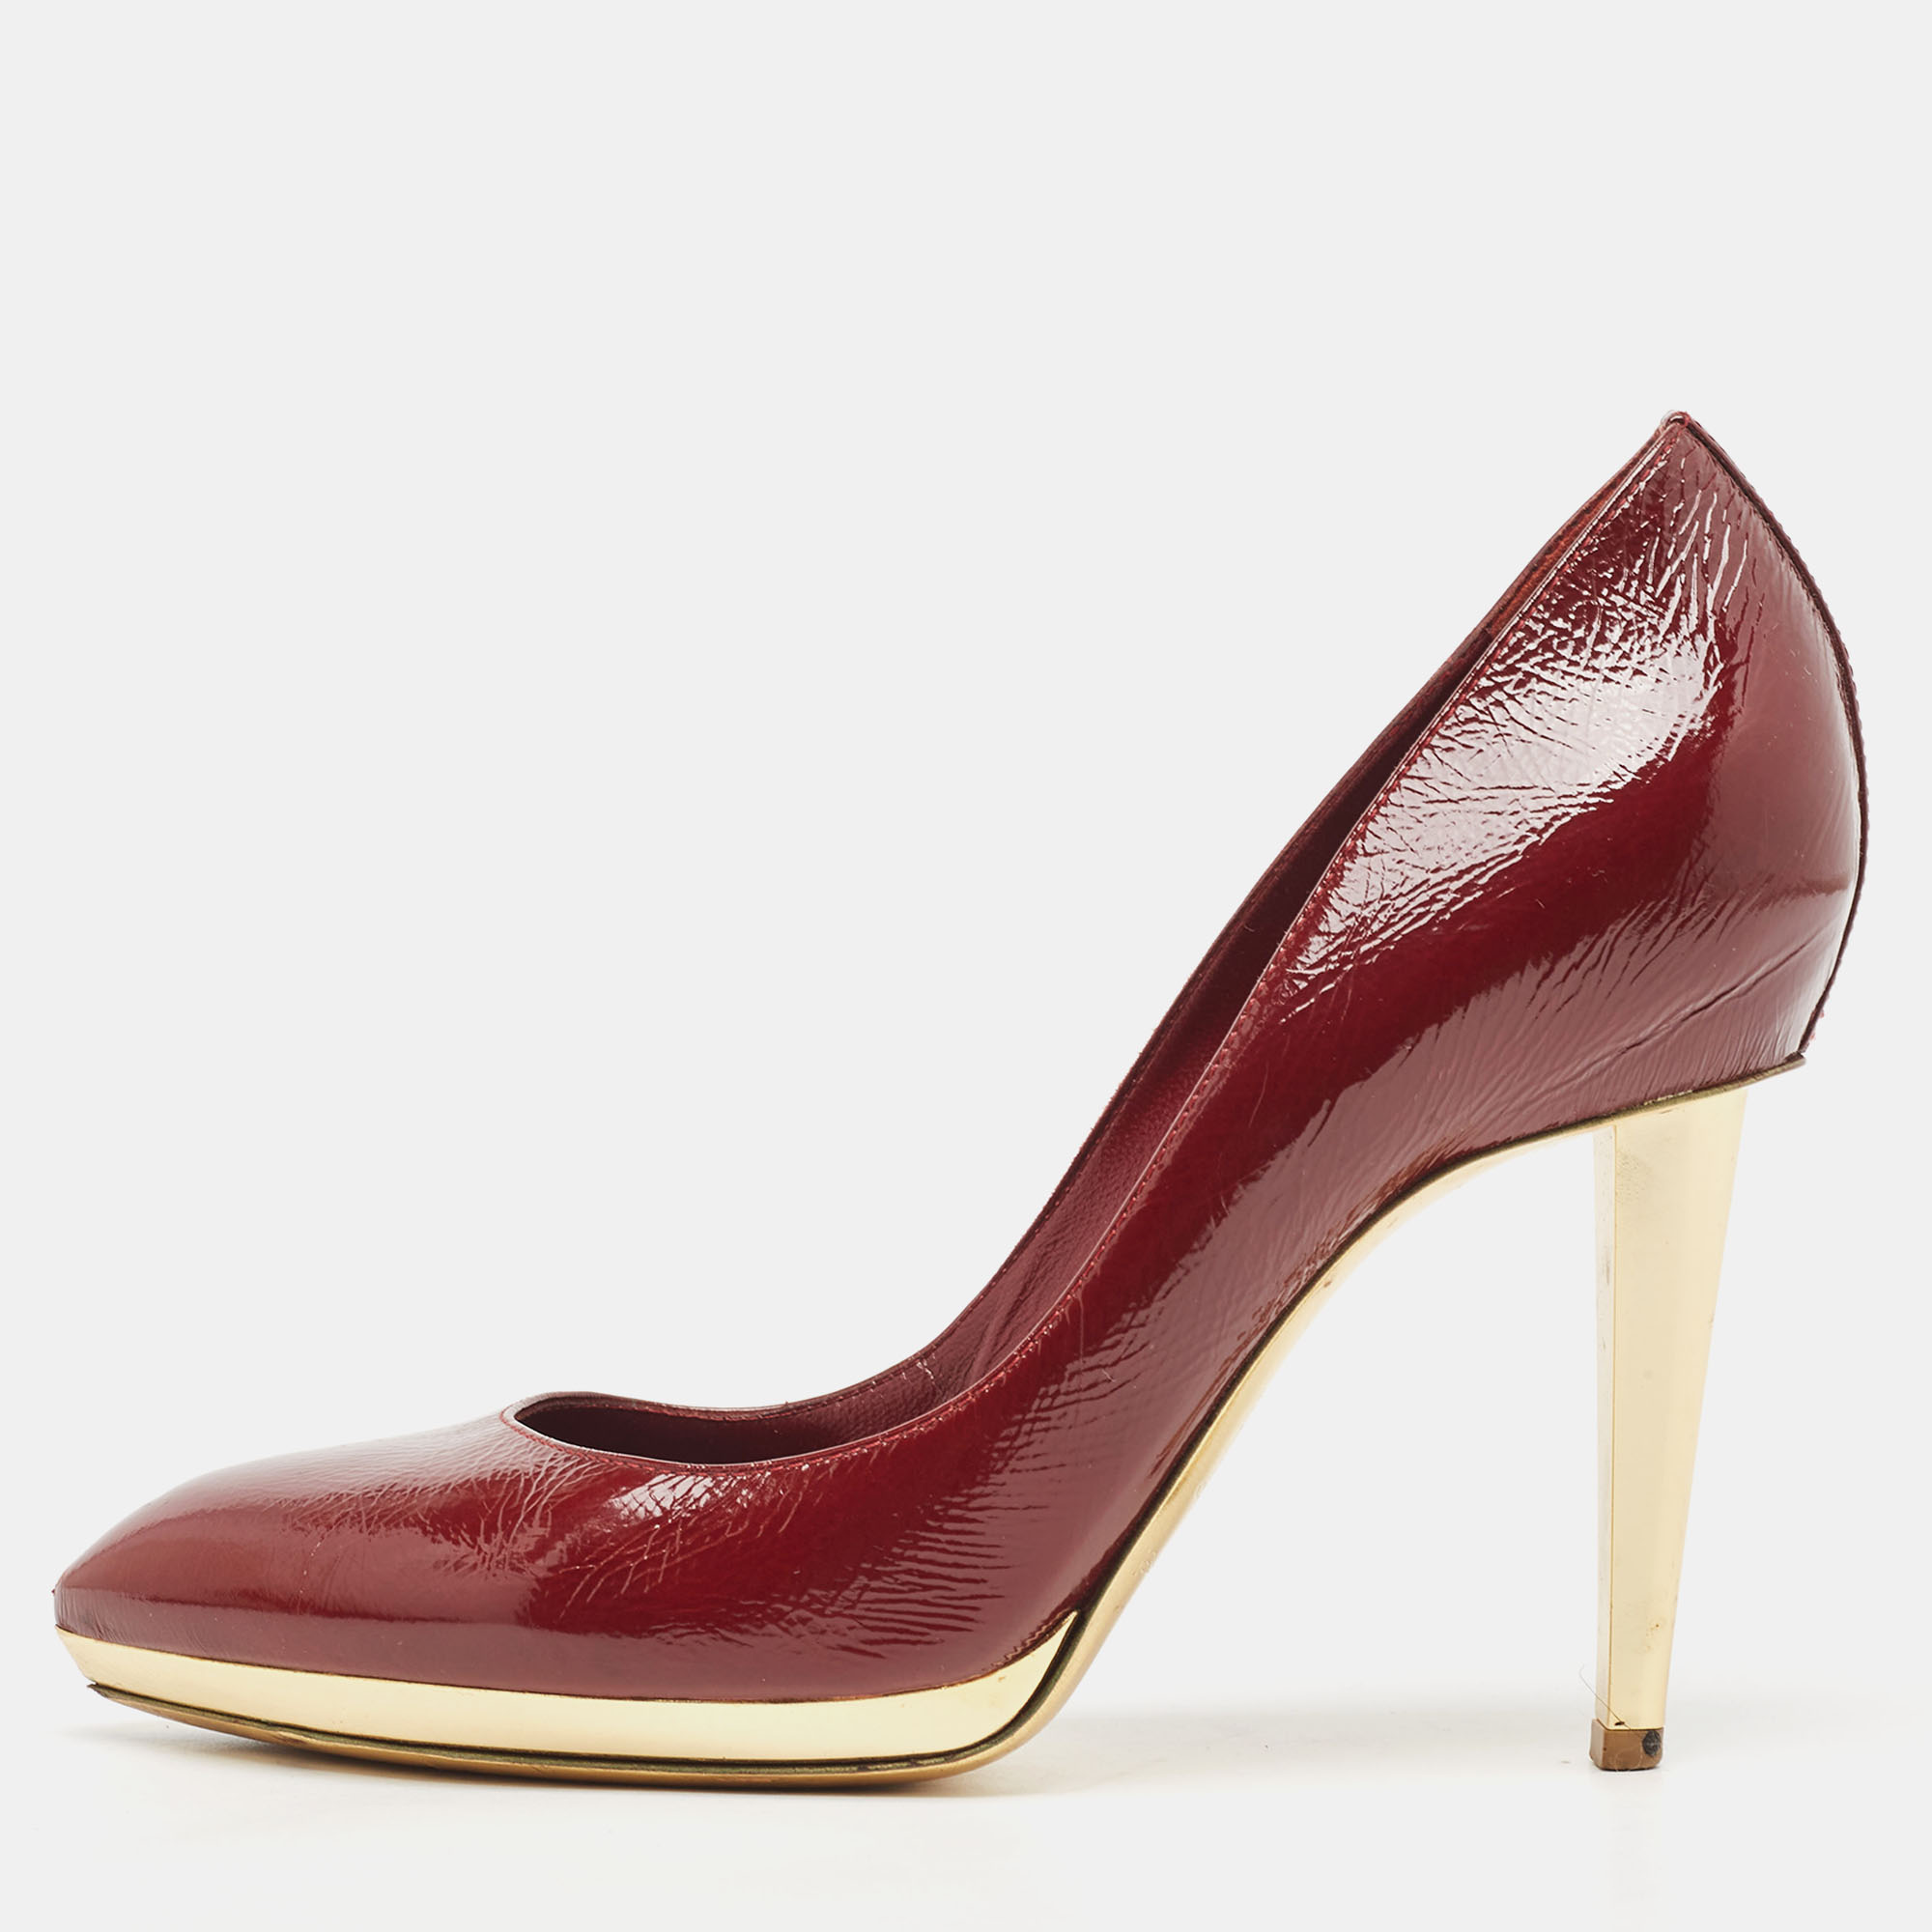 Pre-owned Sergio Rossi Burgundy Patent Leather Platform Pumps Size 39.5